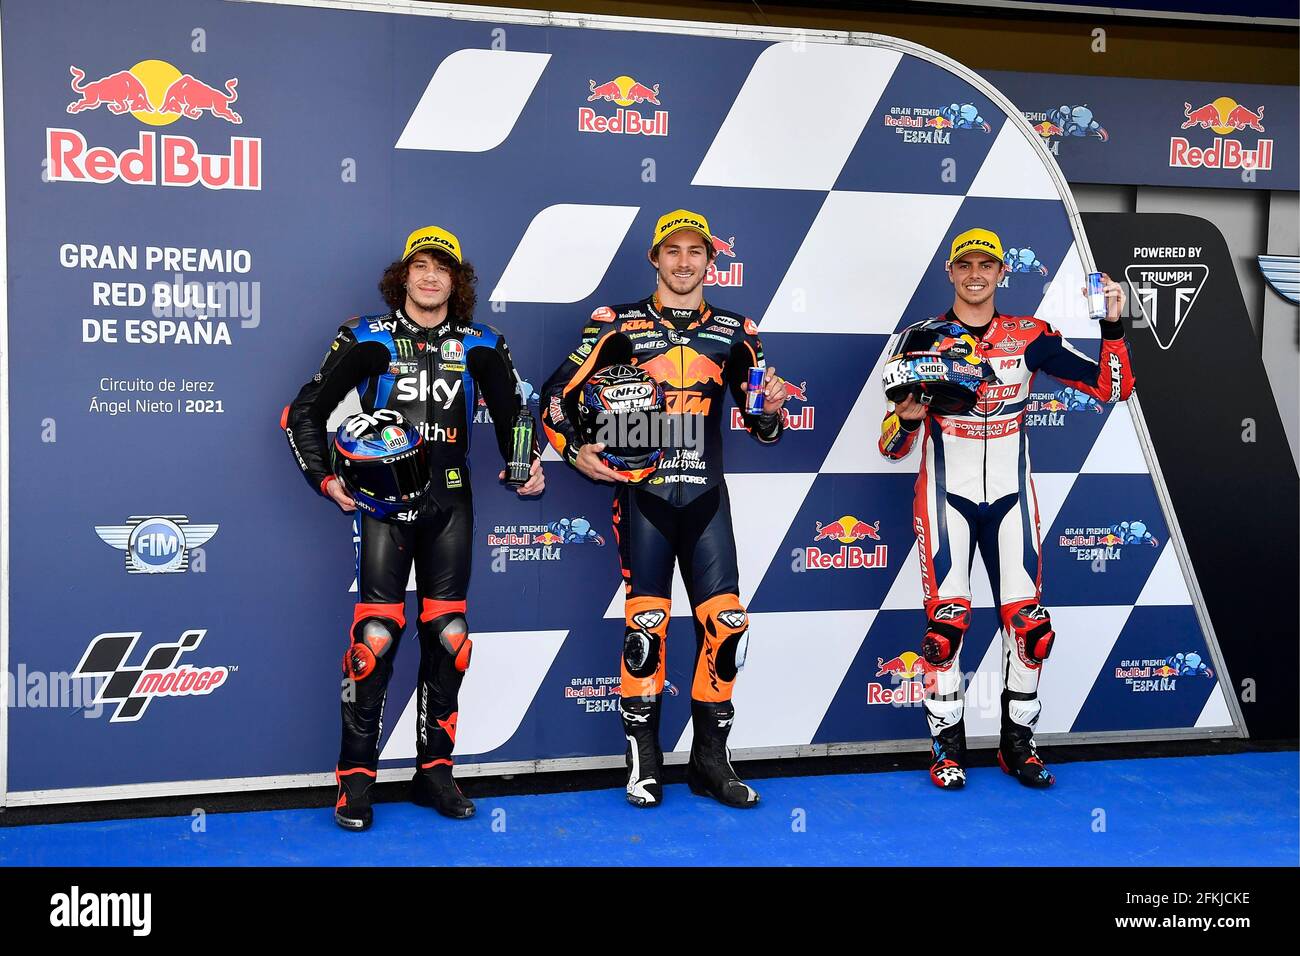 Spain May 1, 2021, Qualifying MotoGP Grand Prix Red of at Jerez circuit, Spain May 1, 2021 In picture: Moto2™ front row L-R: Gardner, Lowes and Vierge Clasificacion